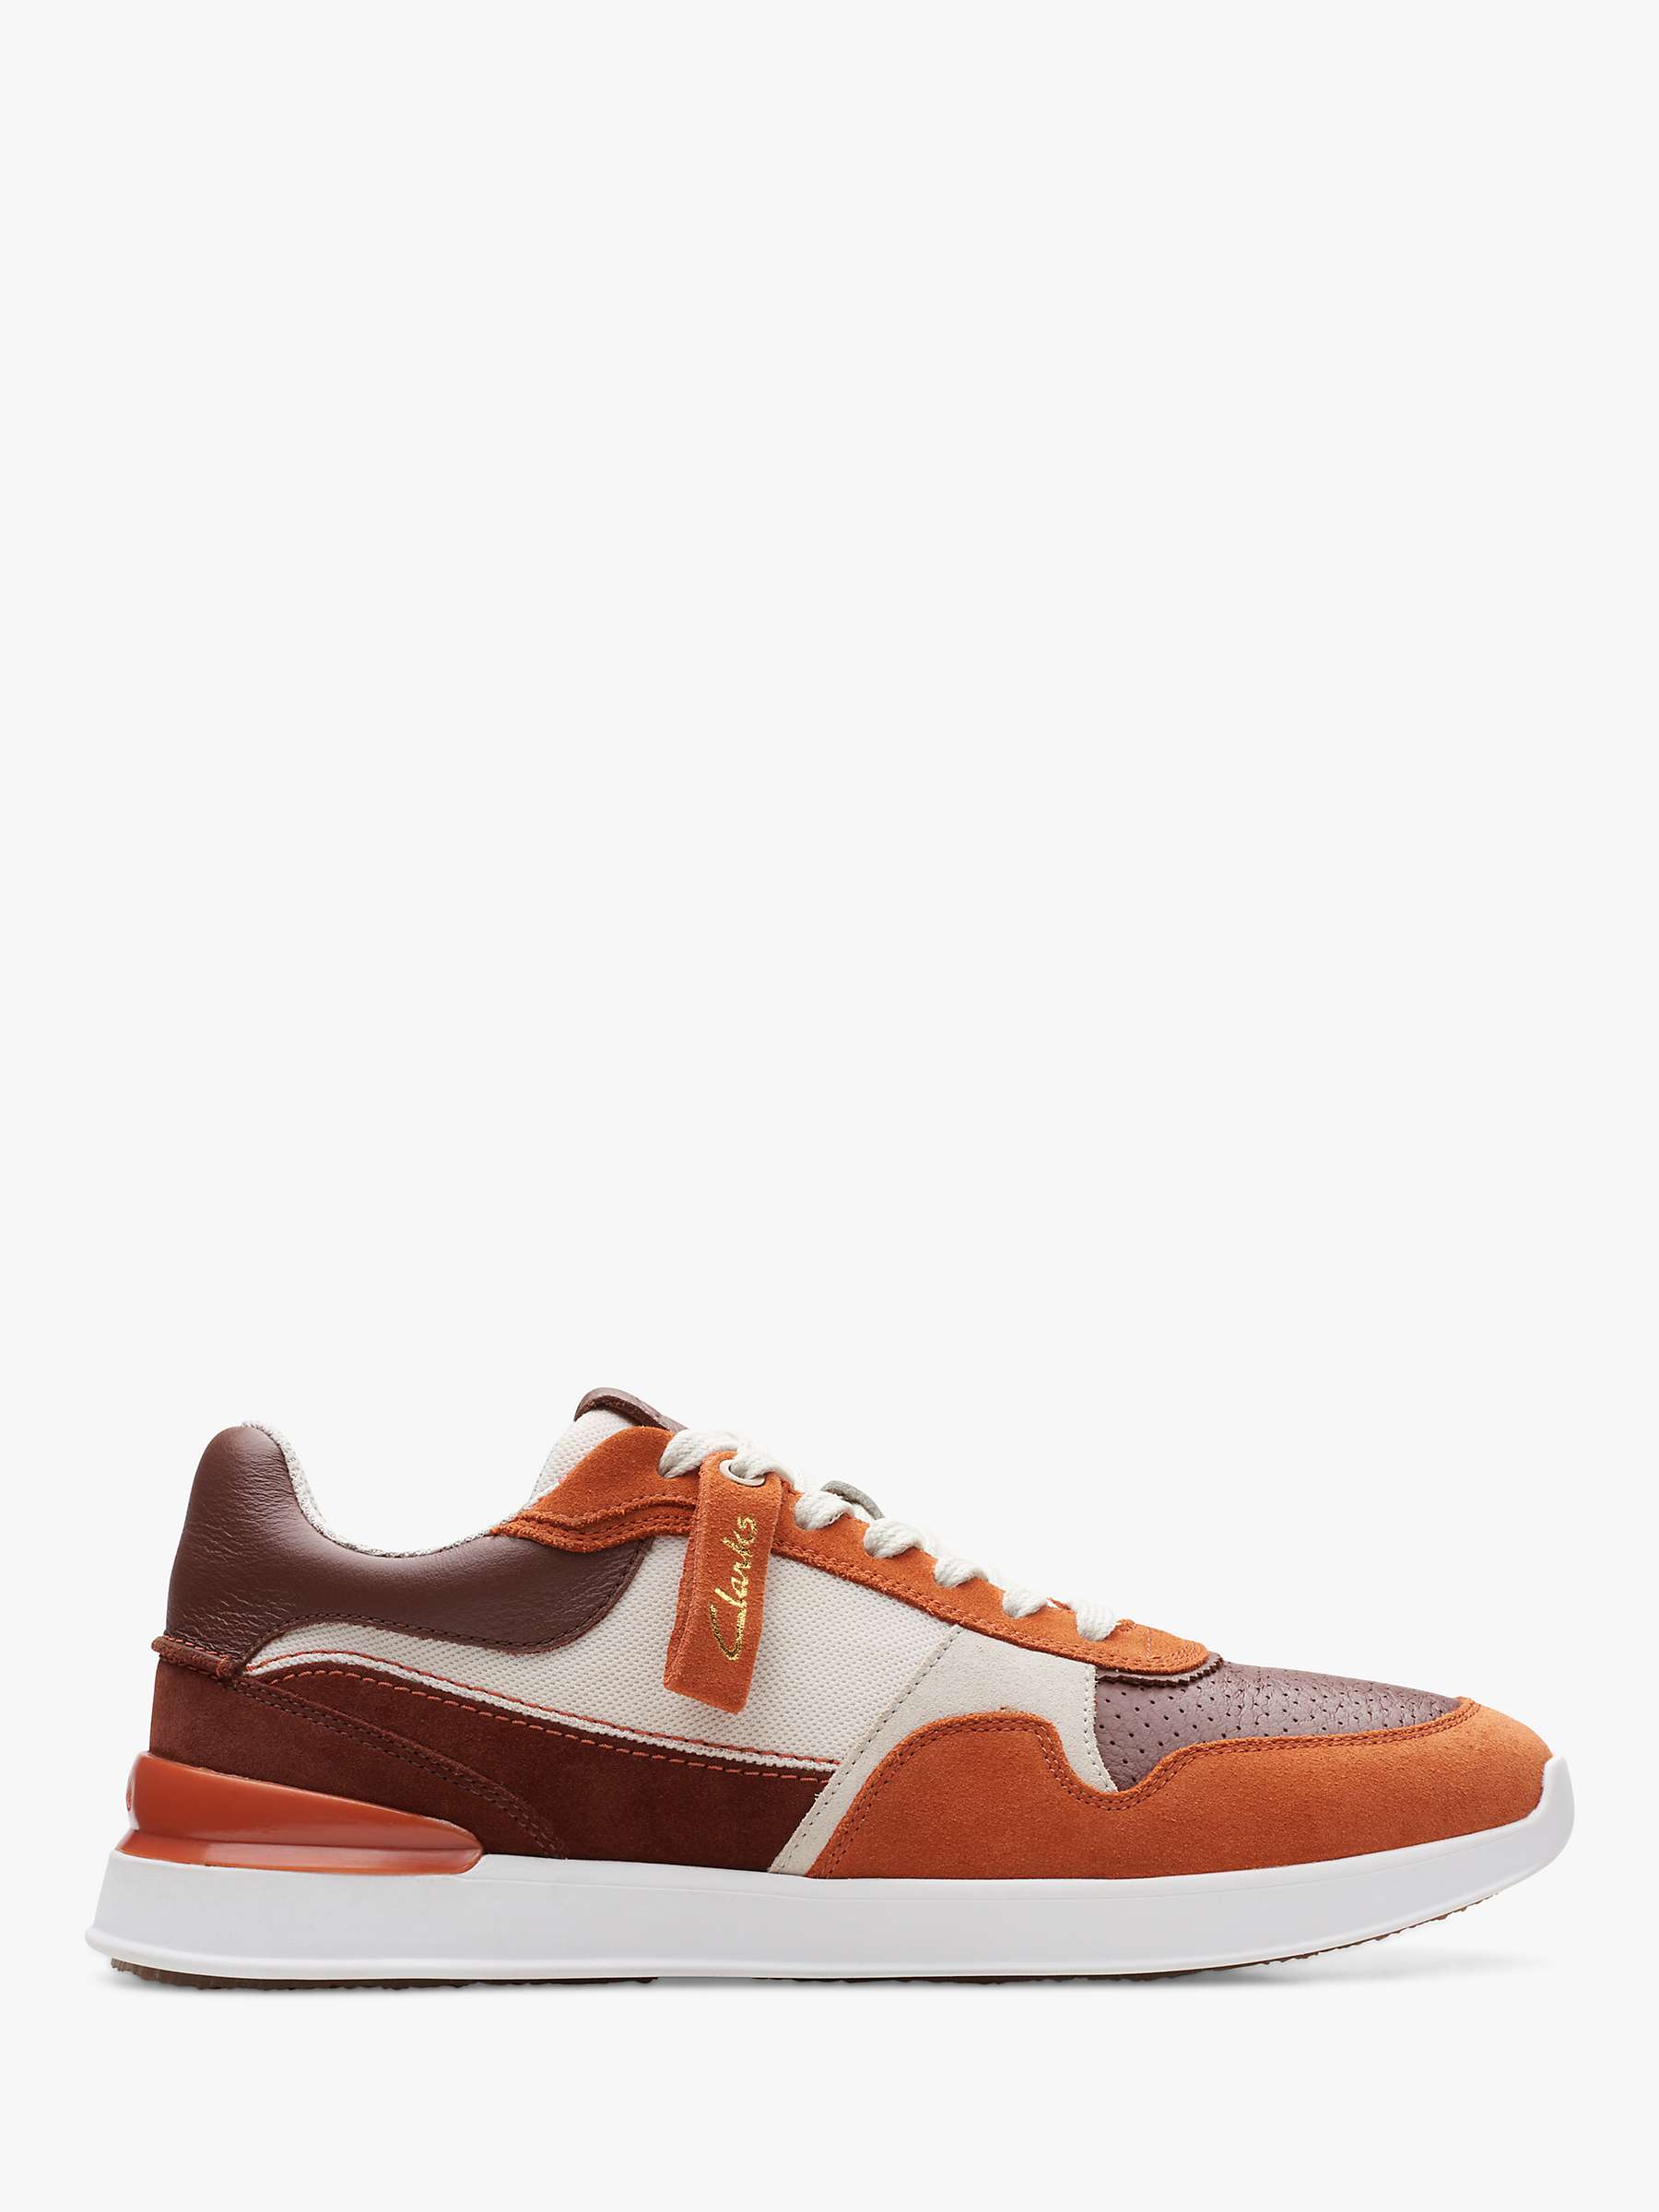 Clarks Race Lite Tor Suede Lace Up Trainers, Rust Combi at John Lewis ...